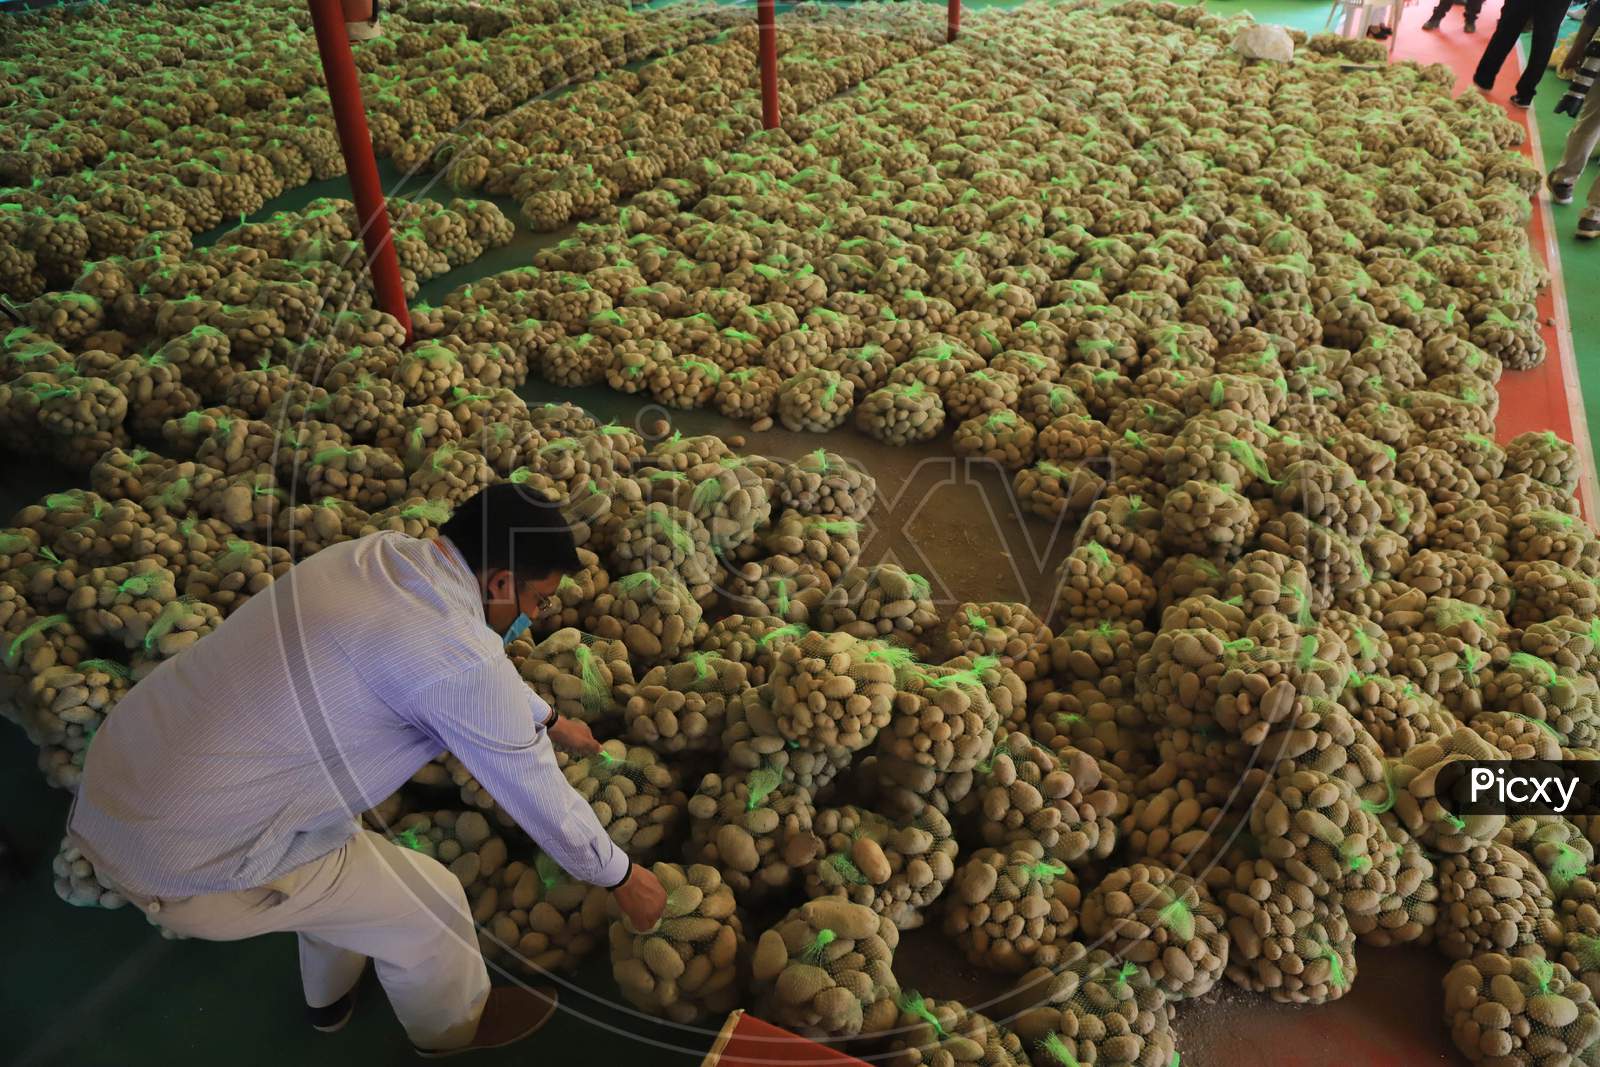 A Government Employee Picks up A Potato Packet For Distribution to Poor People During Nationwide Lockdown For  Coronavirus Disease (Covid-19), In Prayagraj, April, 14, 2020.